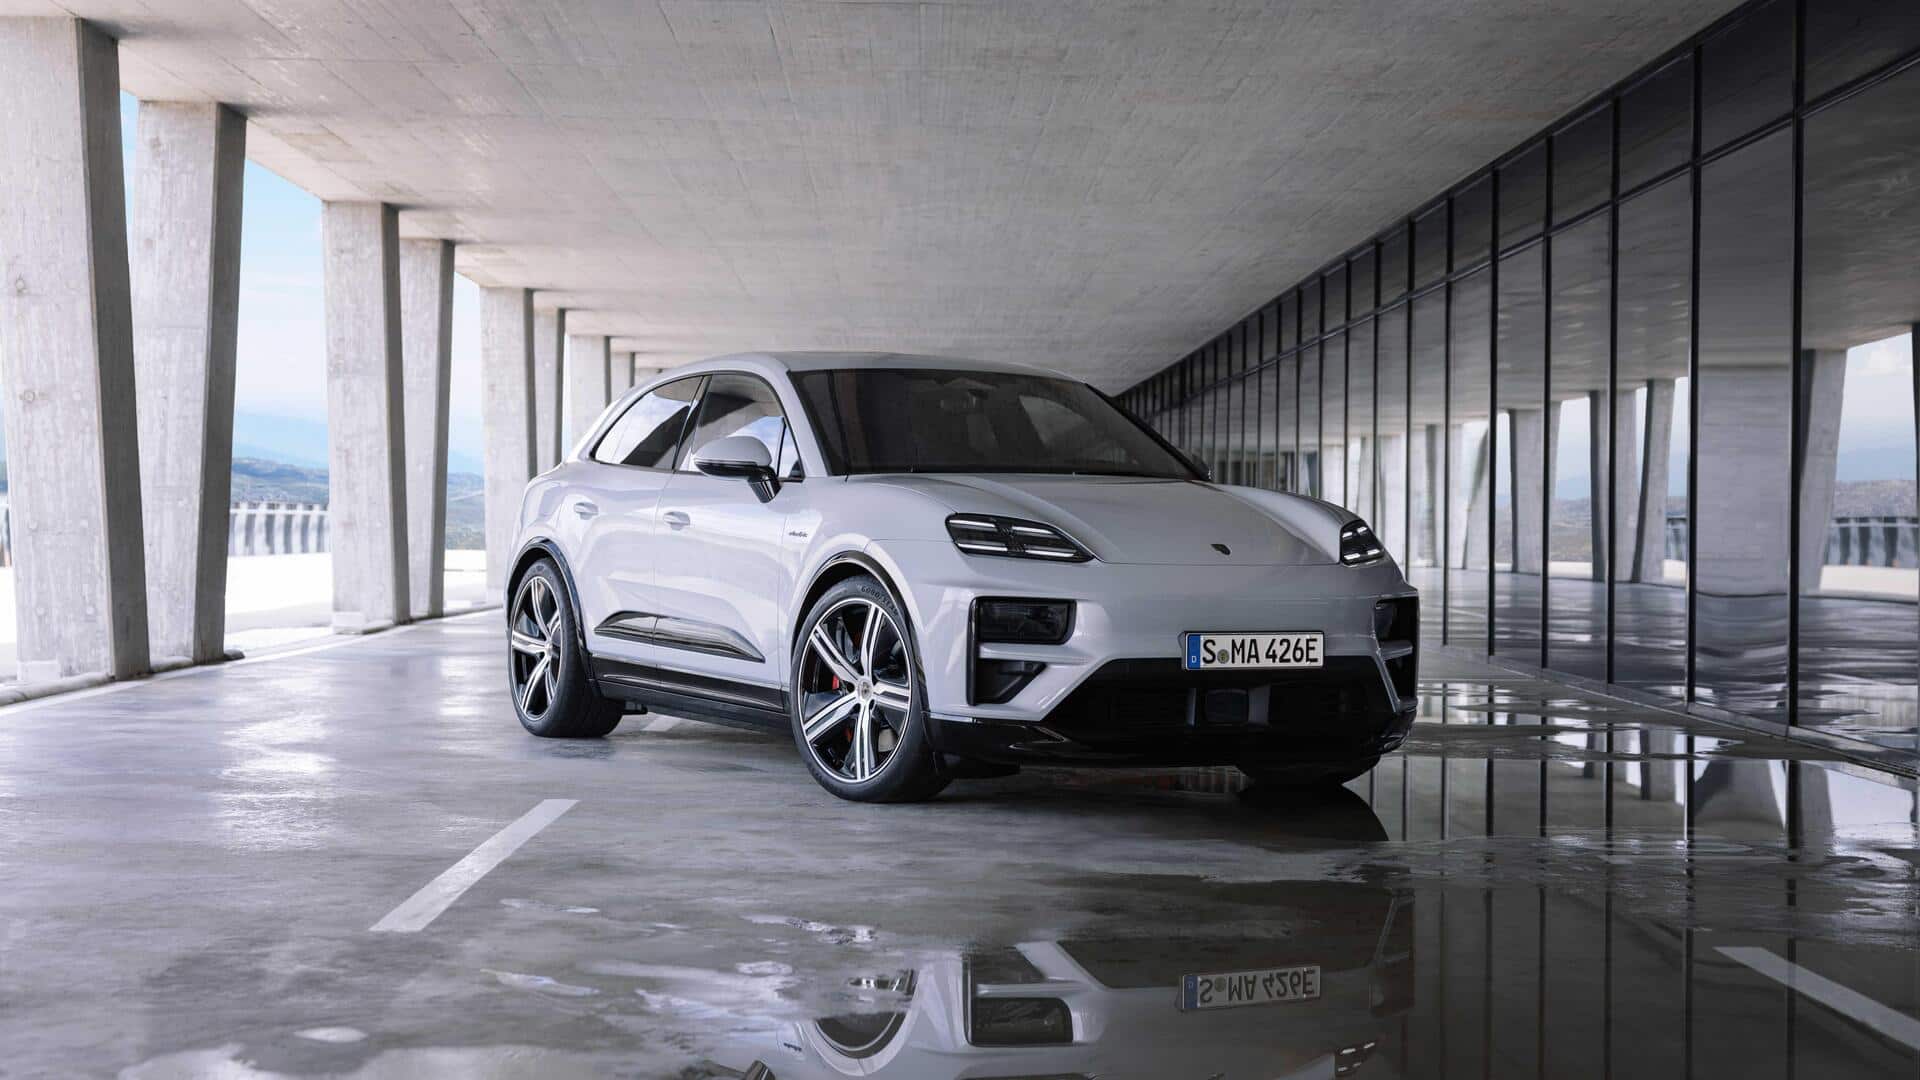 Porsche Macan EV launched in India at Rs. 1.65 crore